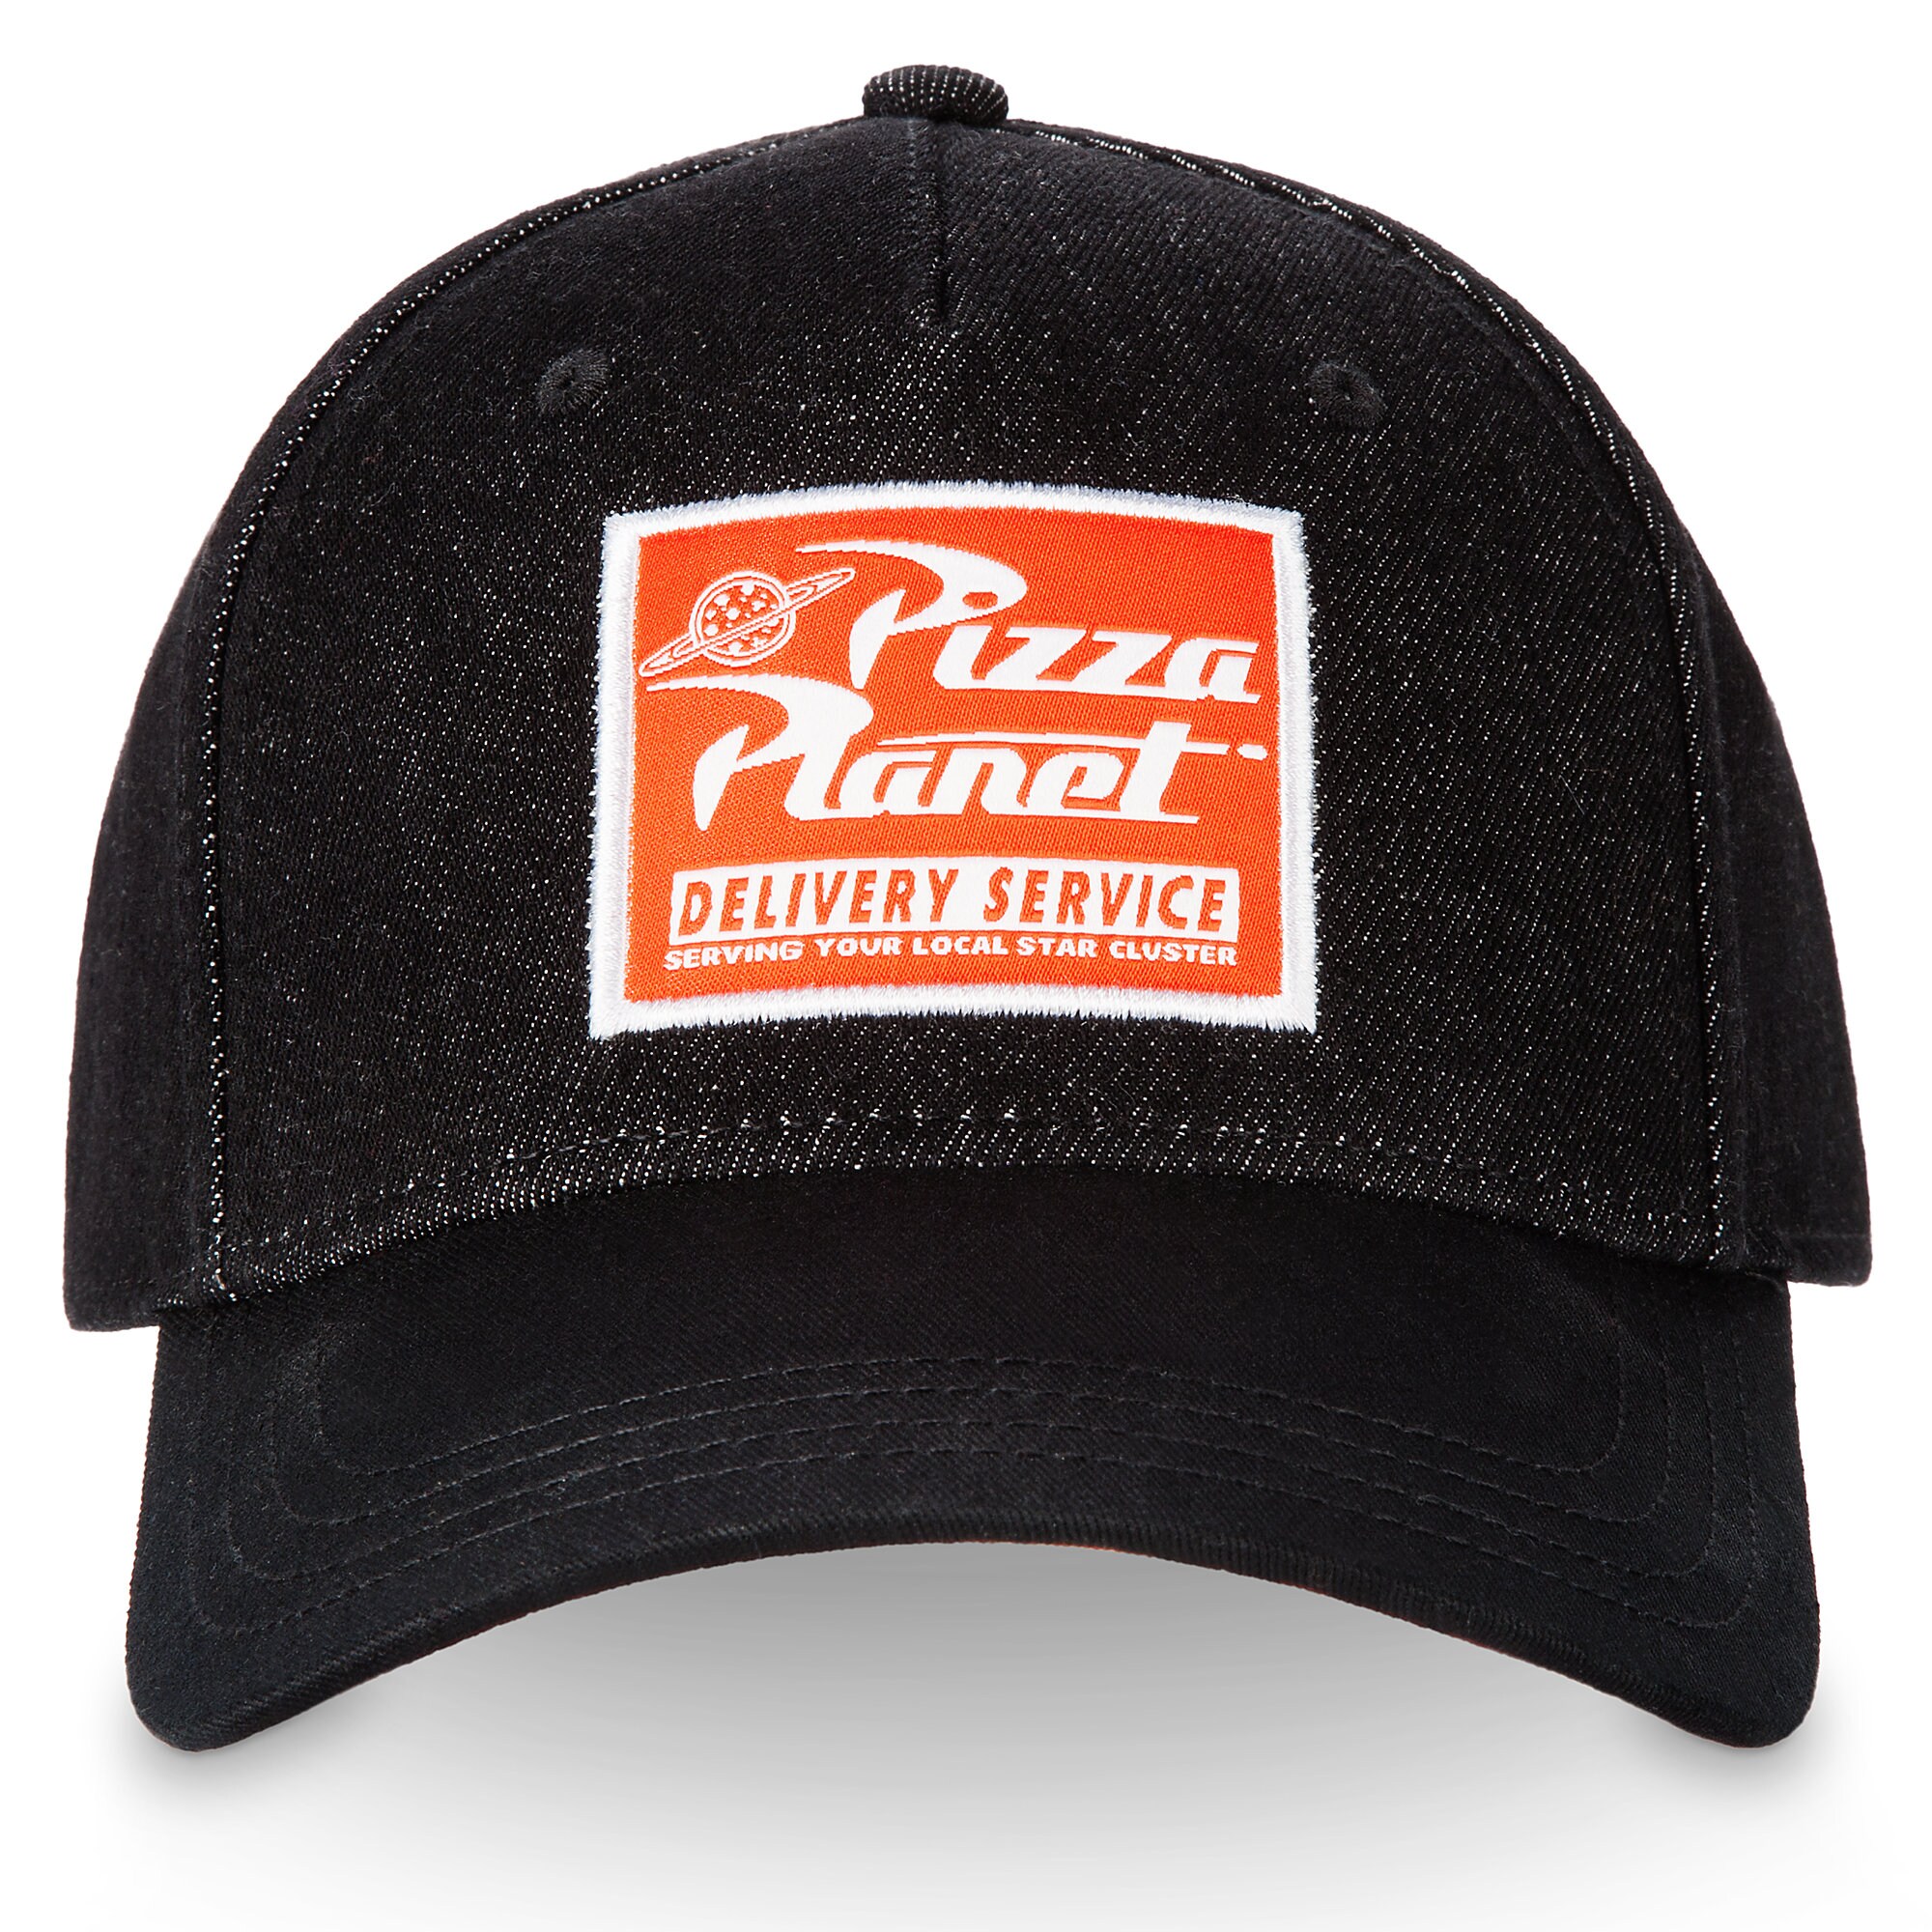 Pizza Planet Baseball Cap for Adults - Toy Story